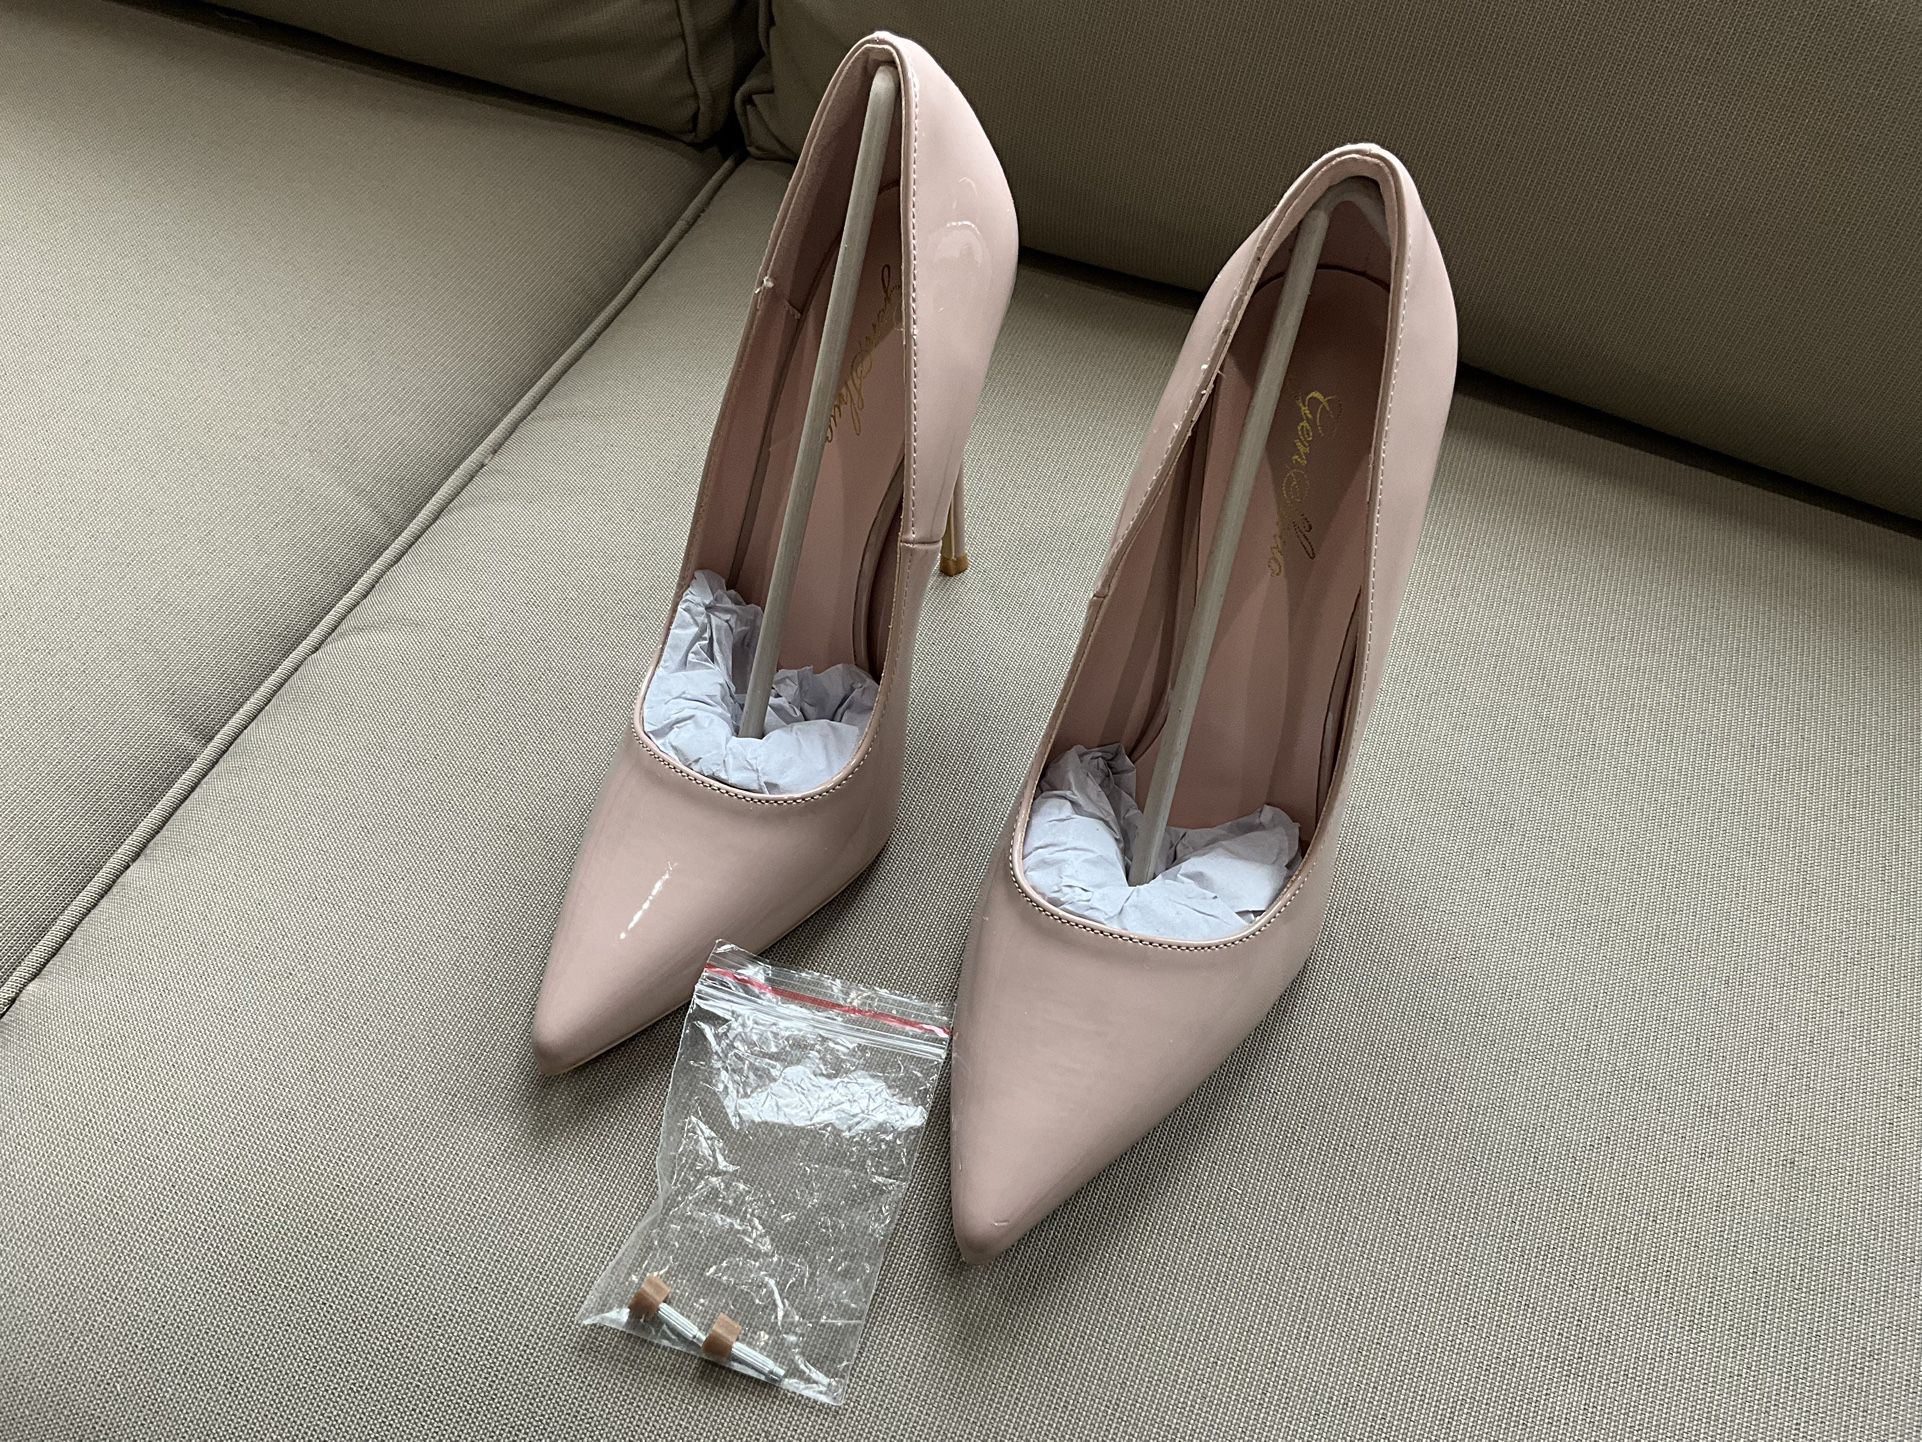 Gen Shuo Women’s High Heel Shoes Size 7 nude pumps high heel 4 inch size 7 New Without The Box 